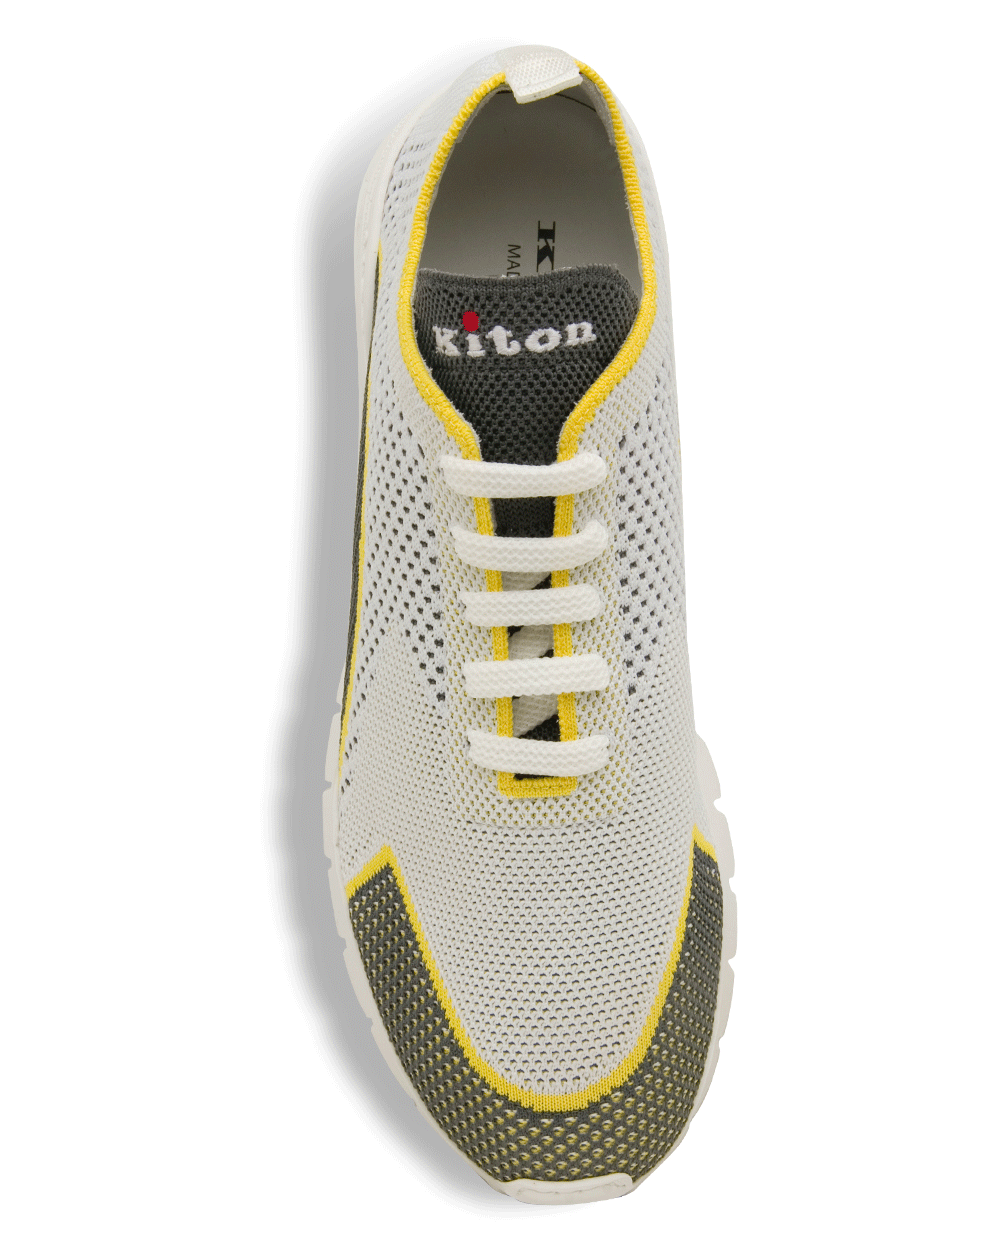 Knit Low Top Sneaker in Grey and Yellow